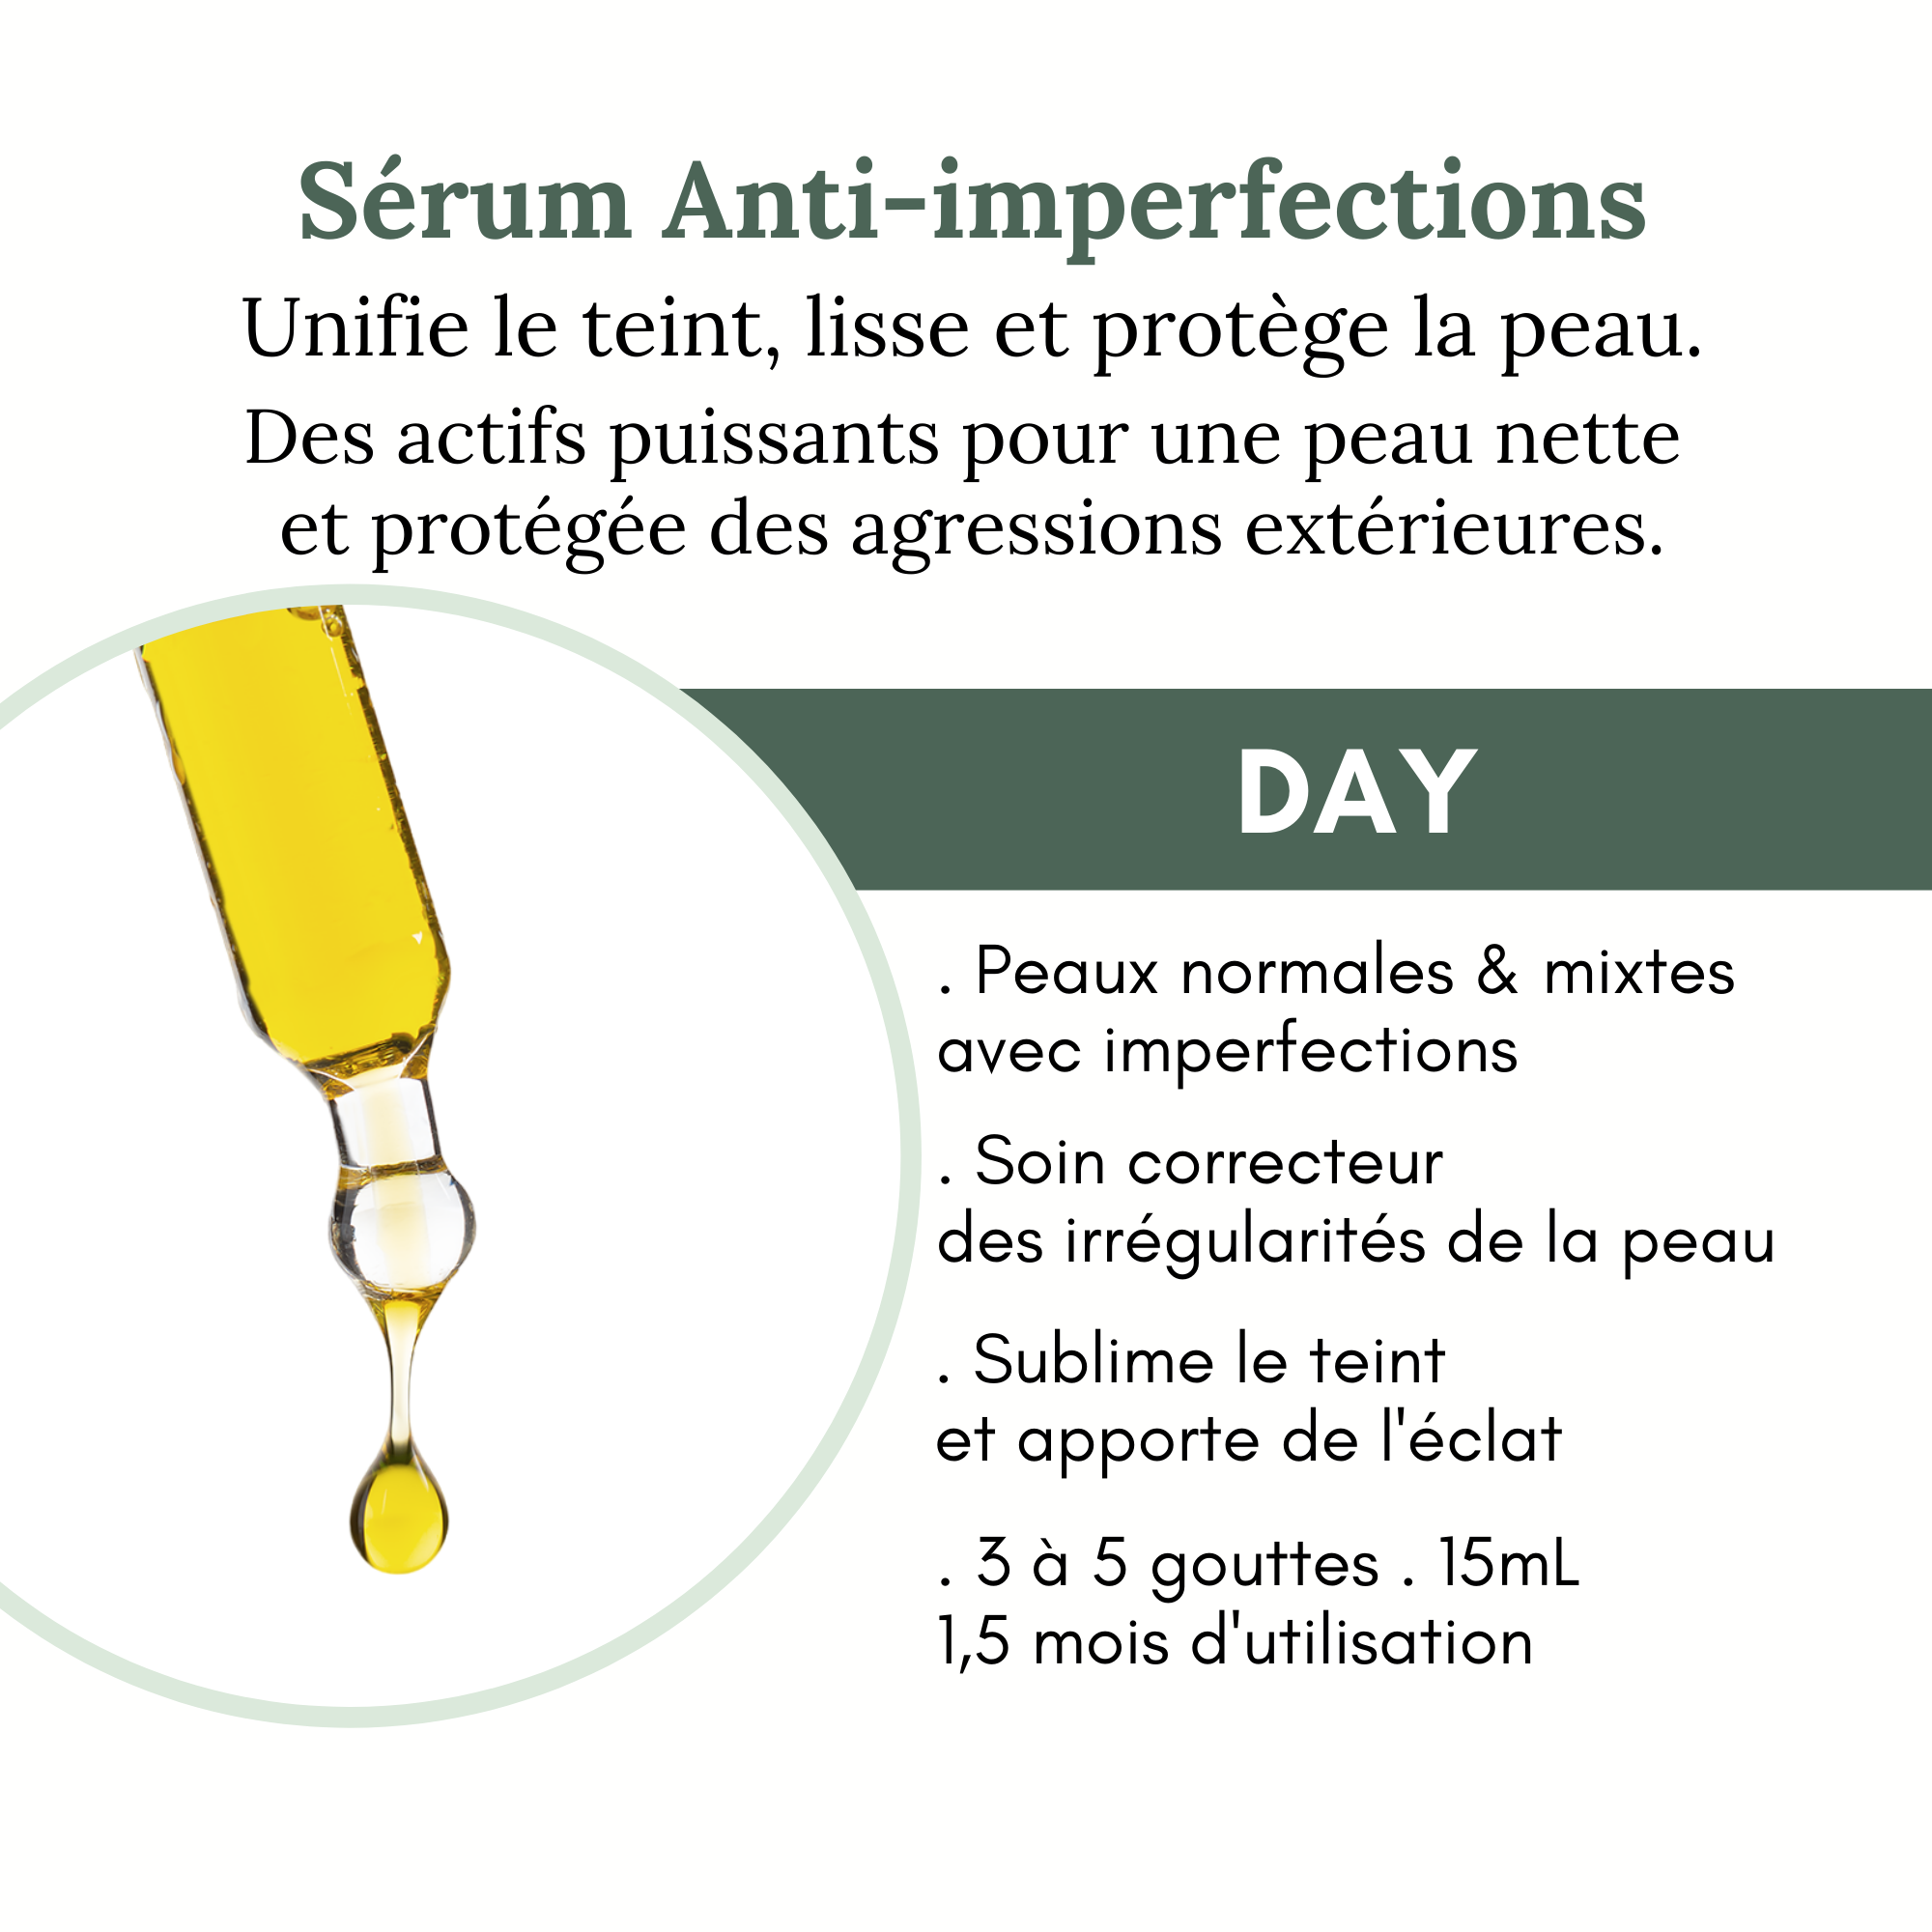 Sérum anti-imperfections DAY